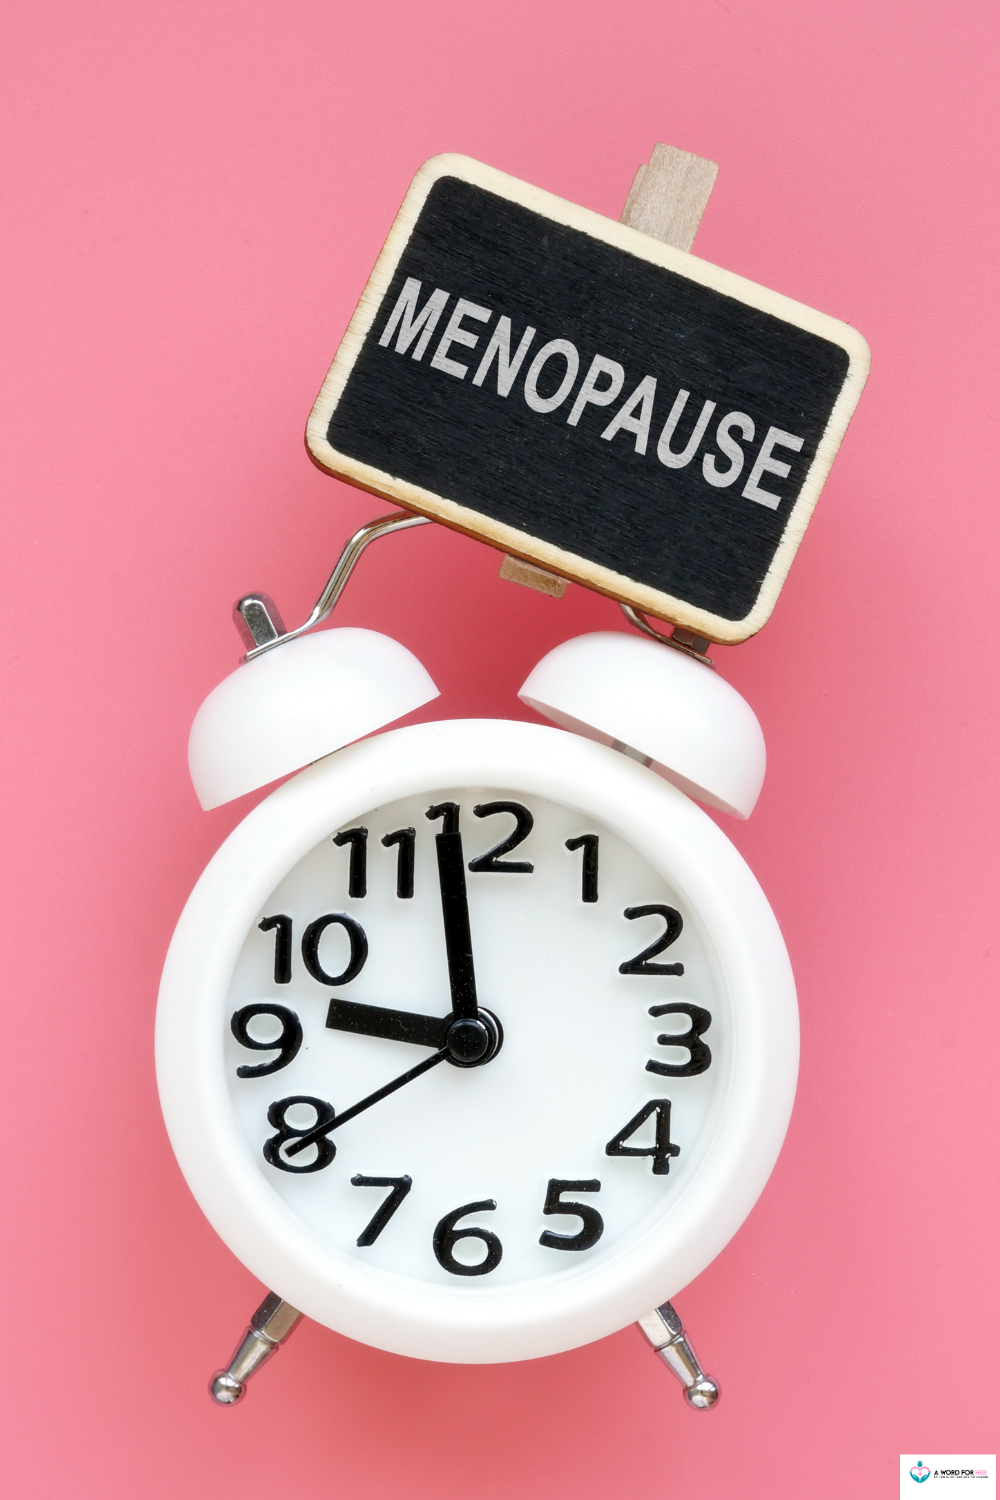 How to go through Menopause with grace